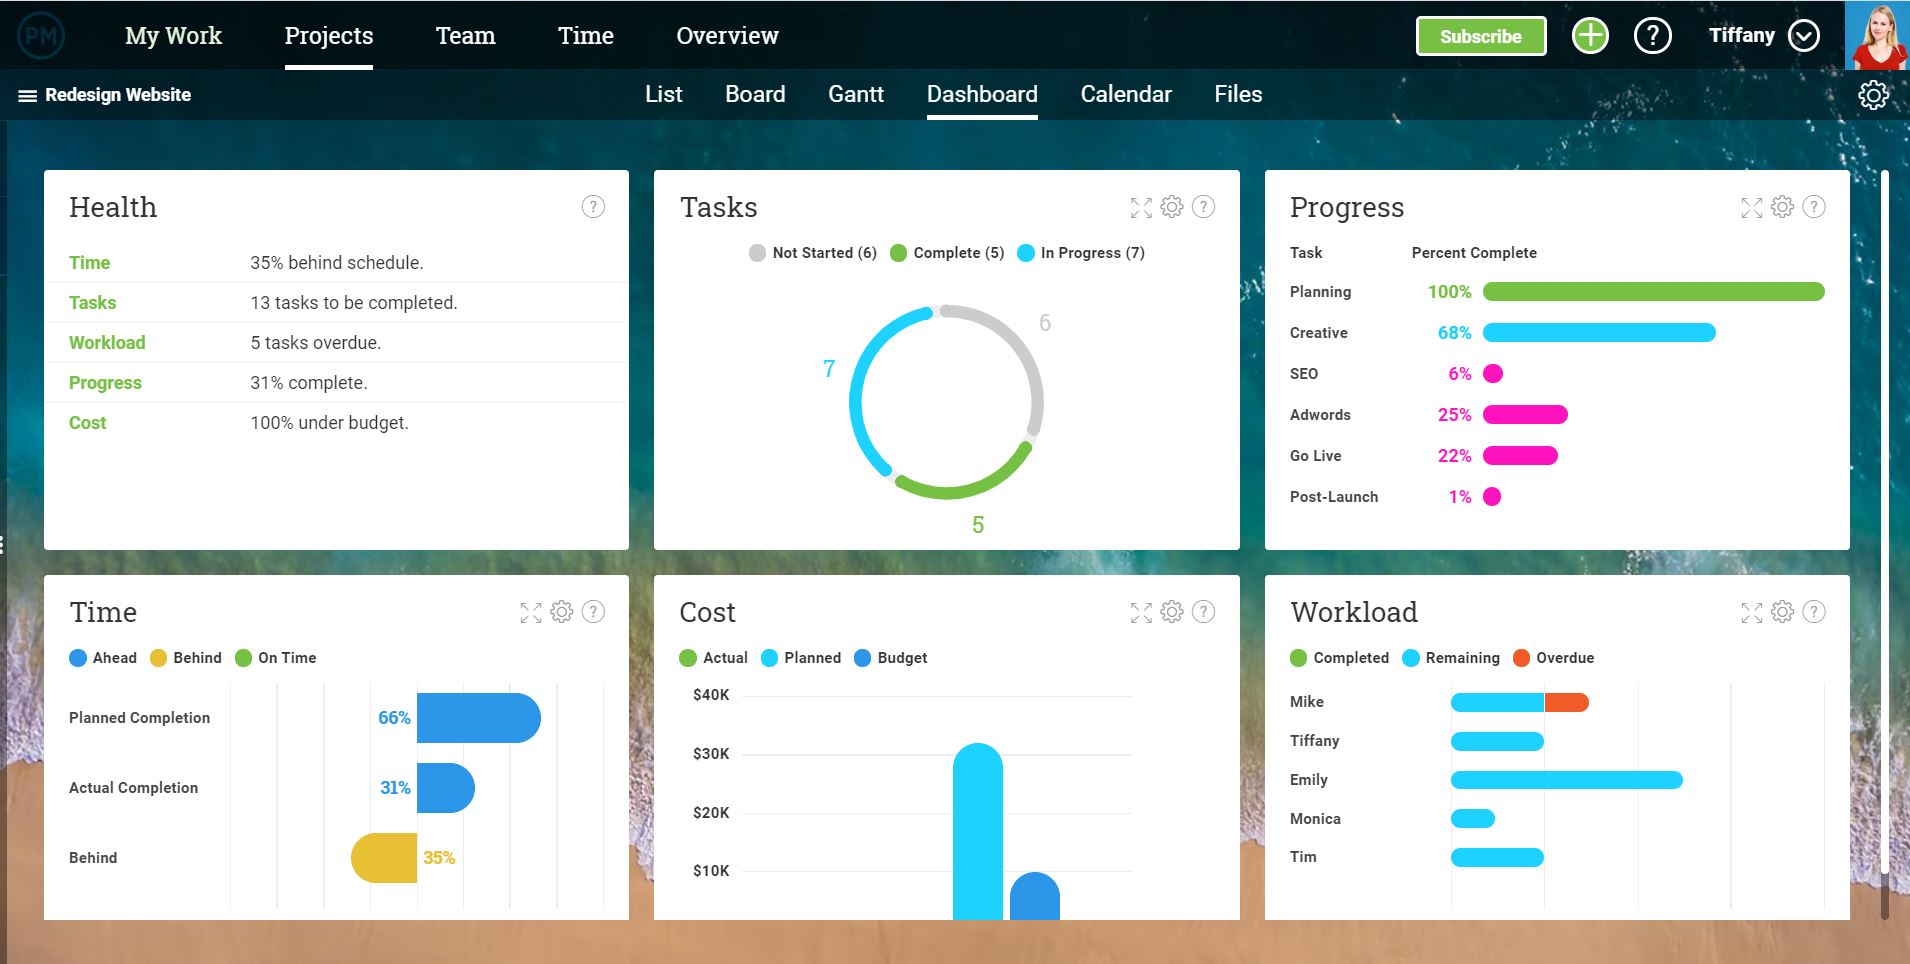 A screenshot of ProjectManager.com's real-time dashboard, displaying project health, tasks, progress, time, cost and workload.